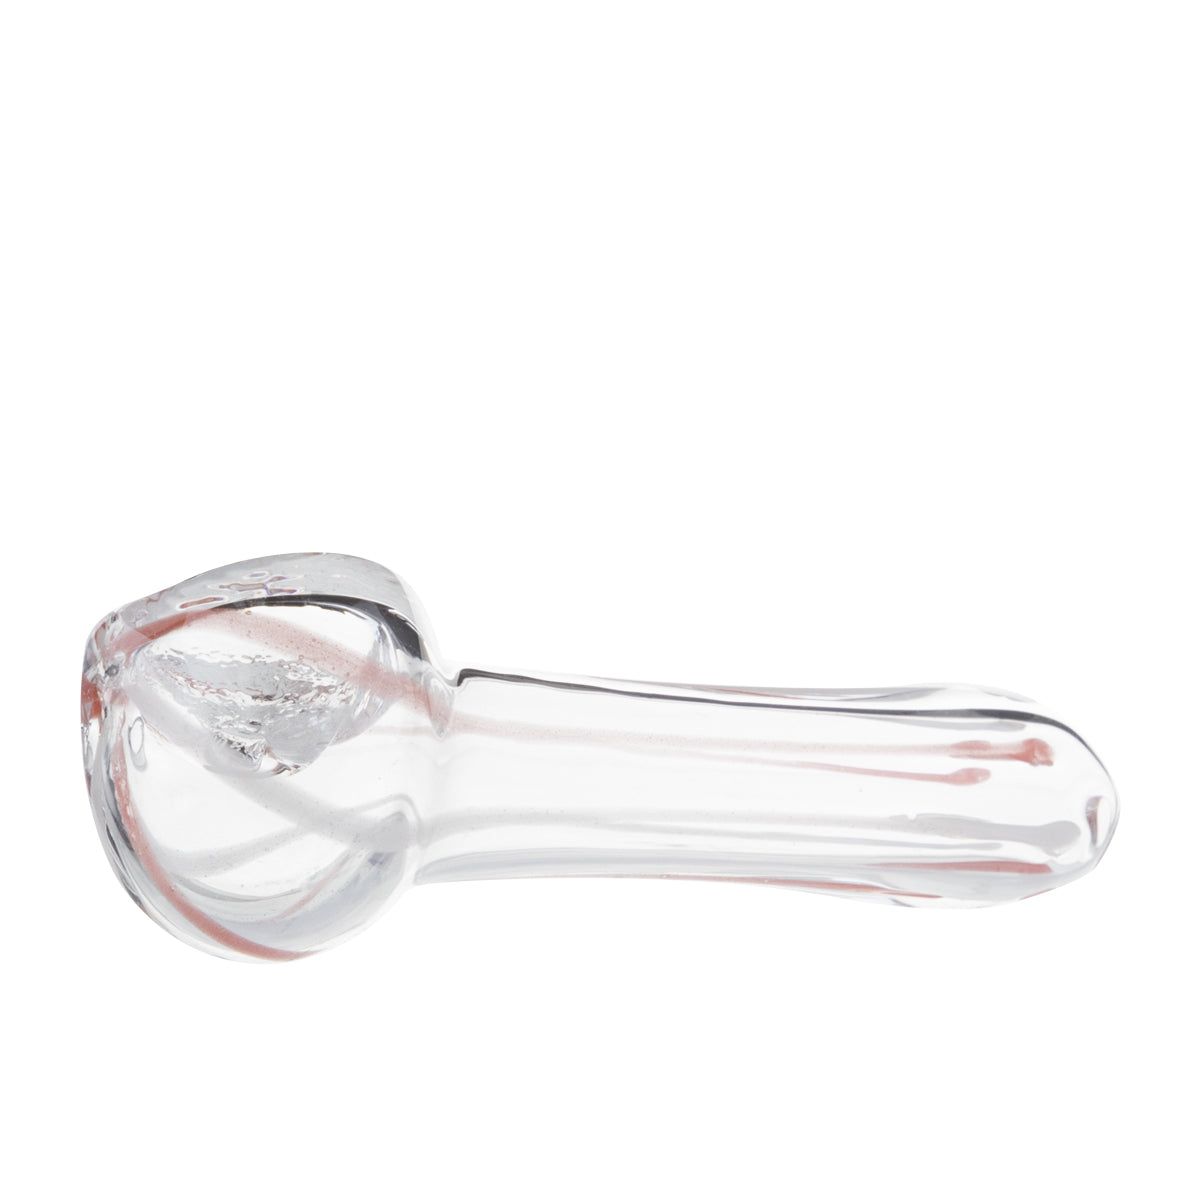 Hand Pipe | Micro Candy Cane Glass - 10 Count | 2-3" - Glass - Assorted